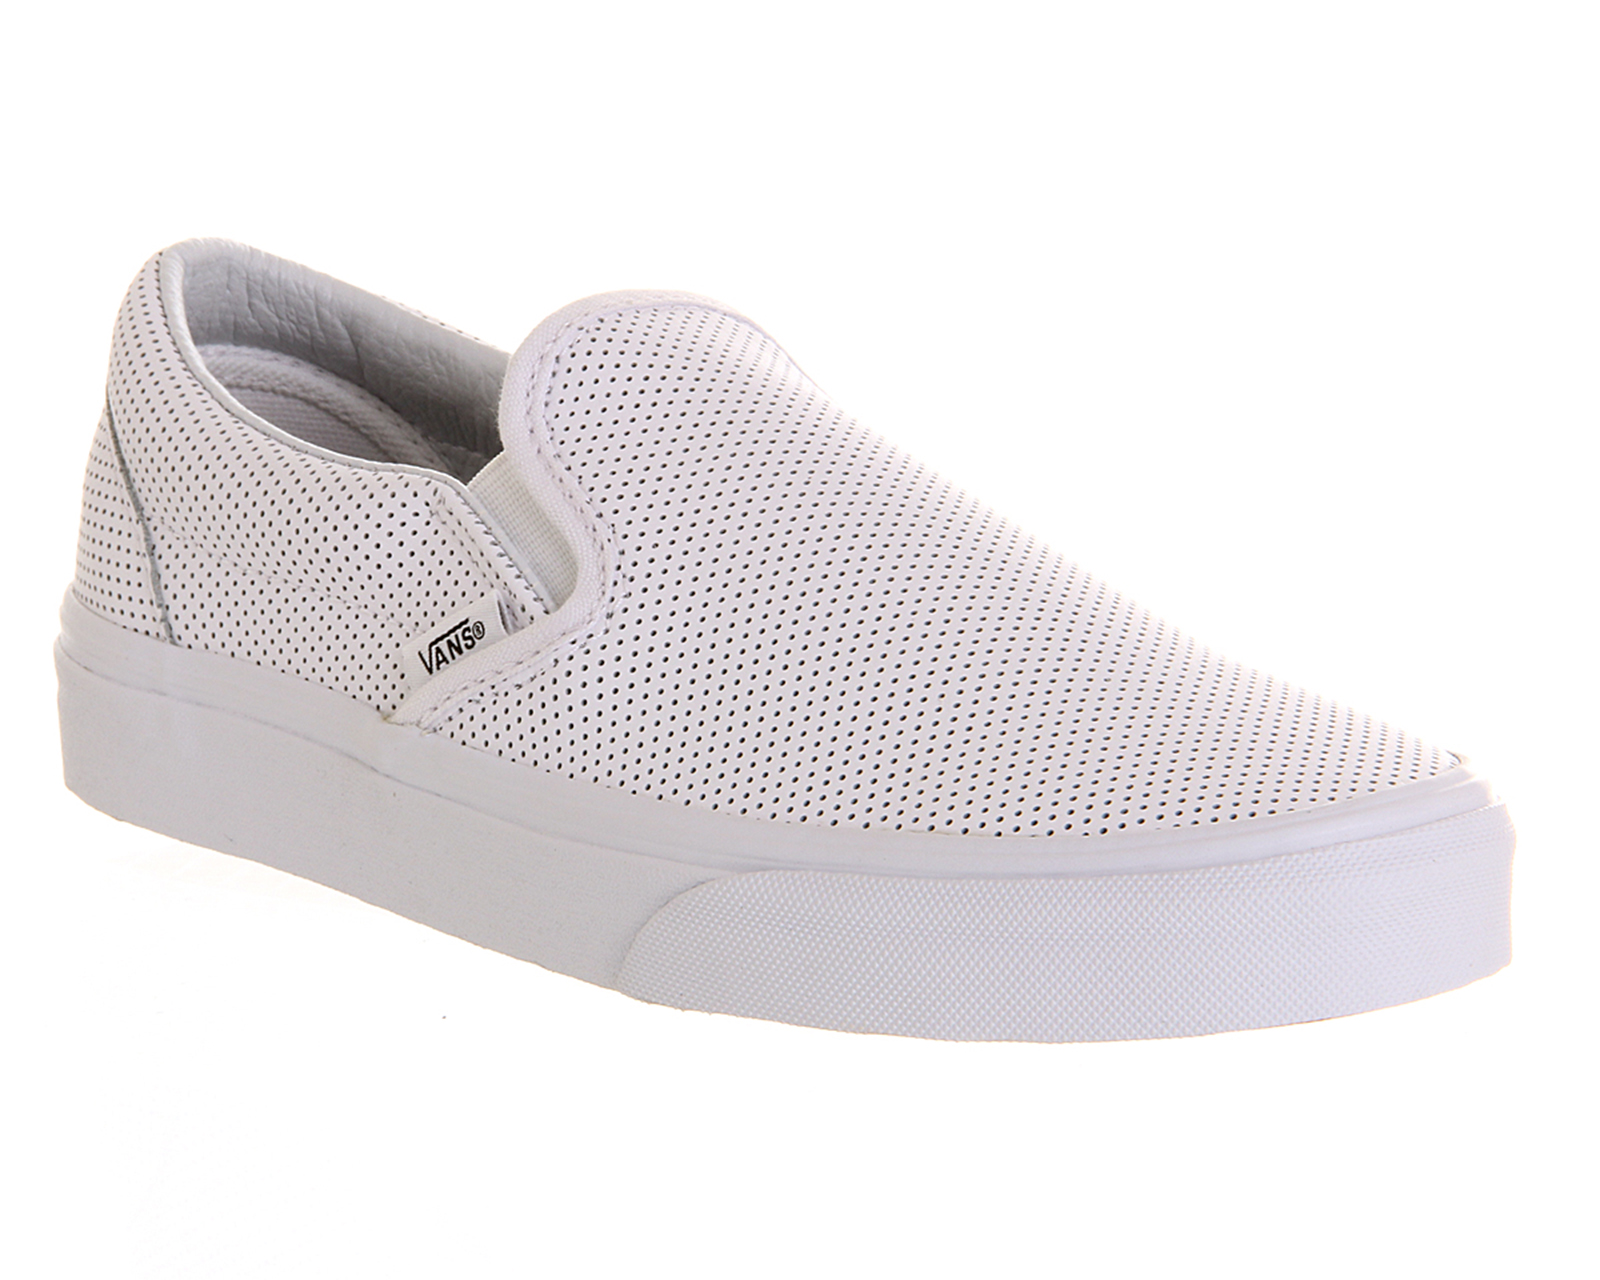 vans slip ons perforated leather